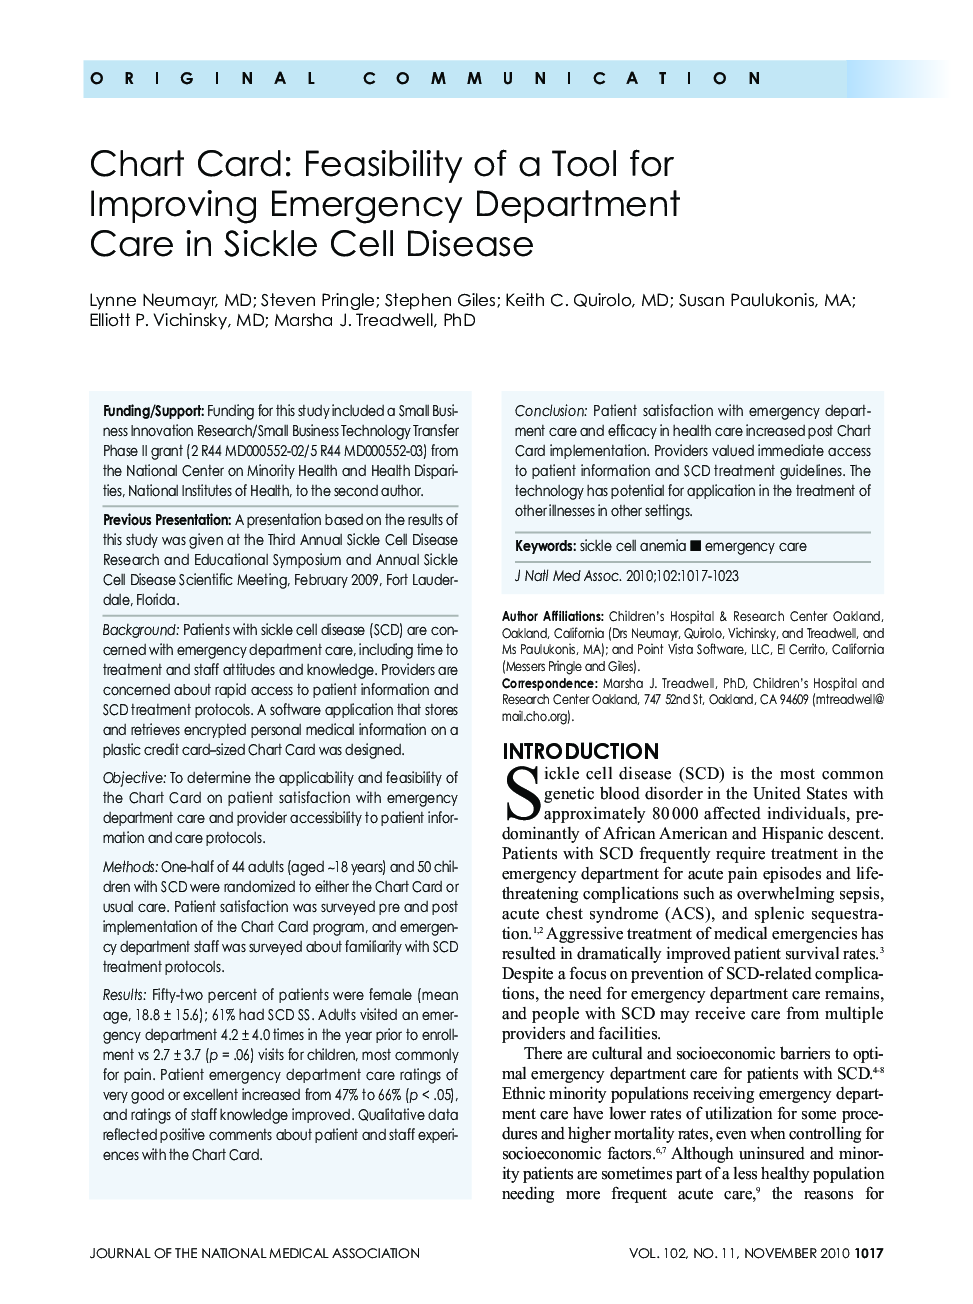 Chart Card: Feasibility of a Tool for Improving Emergency Department Care in Sickle Cell Disease